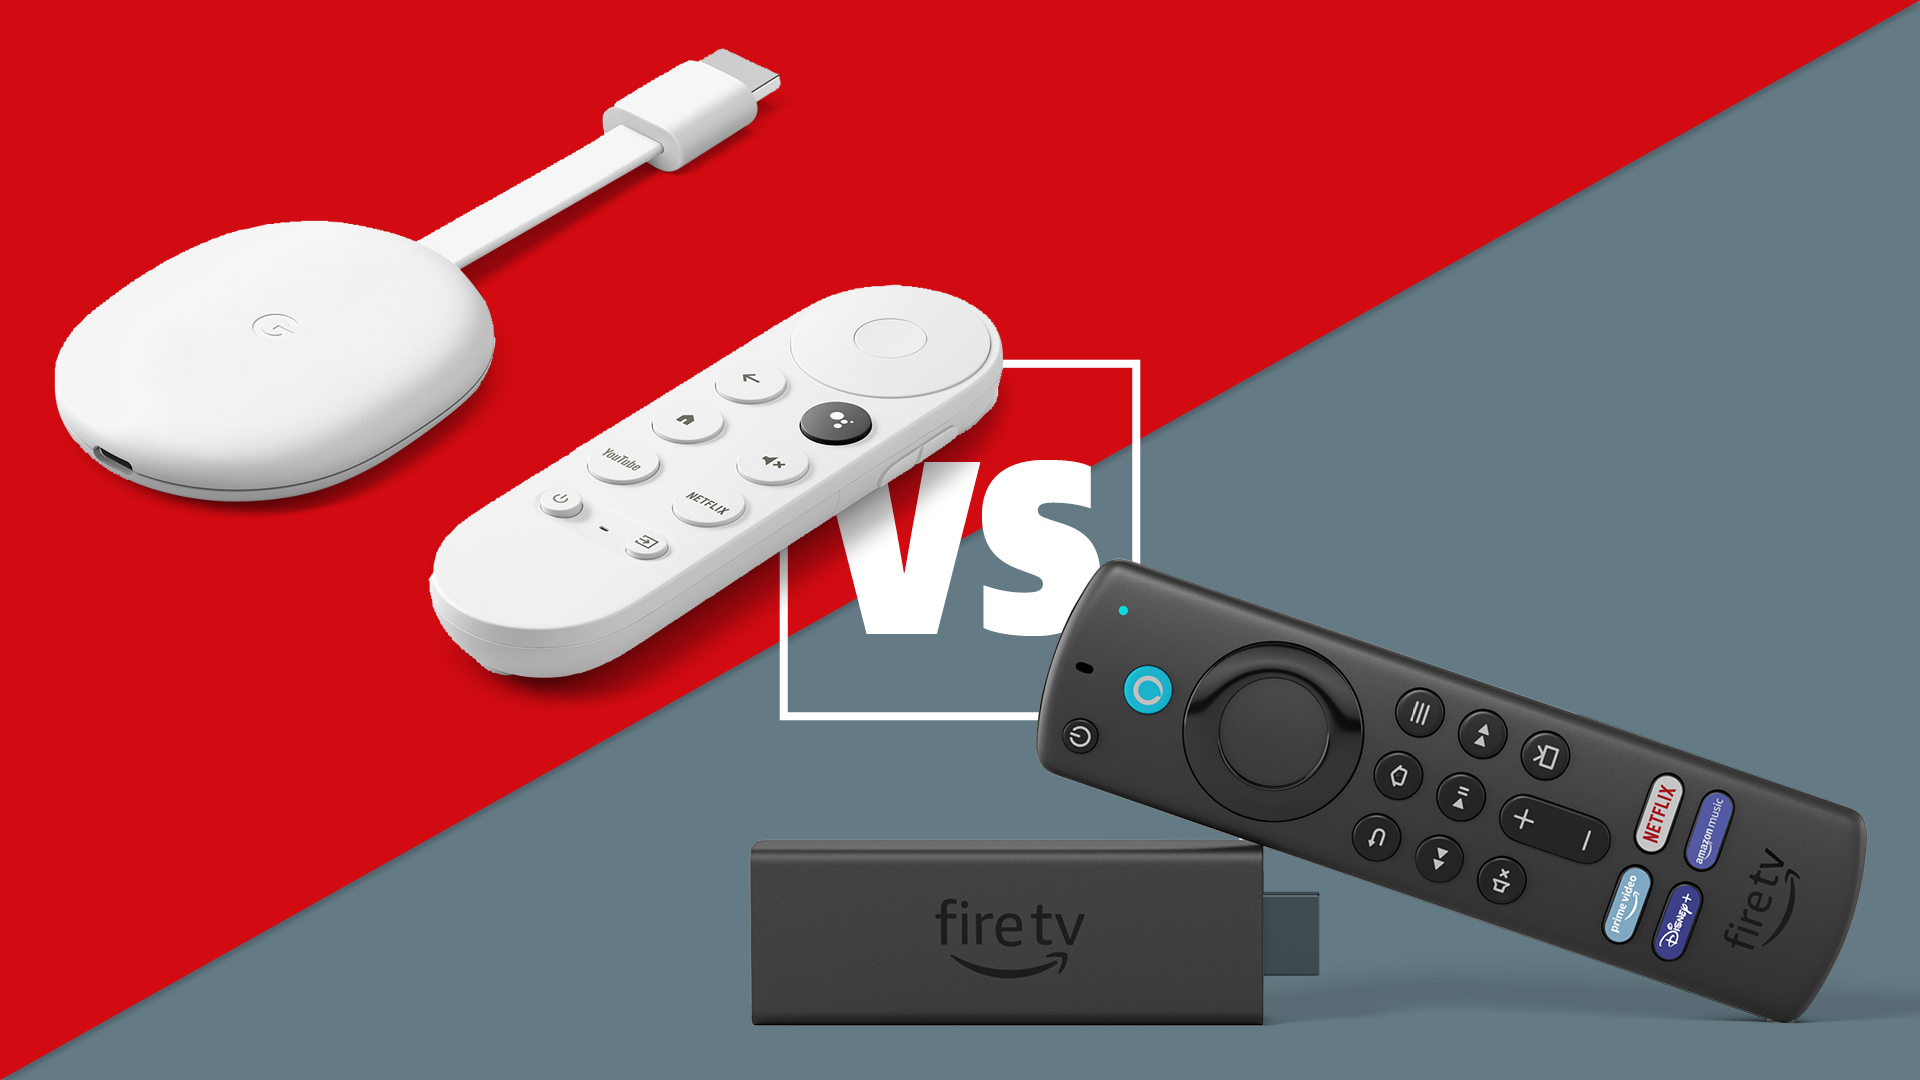 Fire TV Stick 4K vs Chromecast with Google TV: which is the